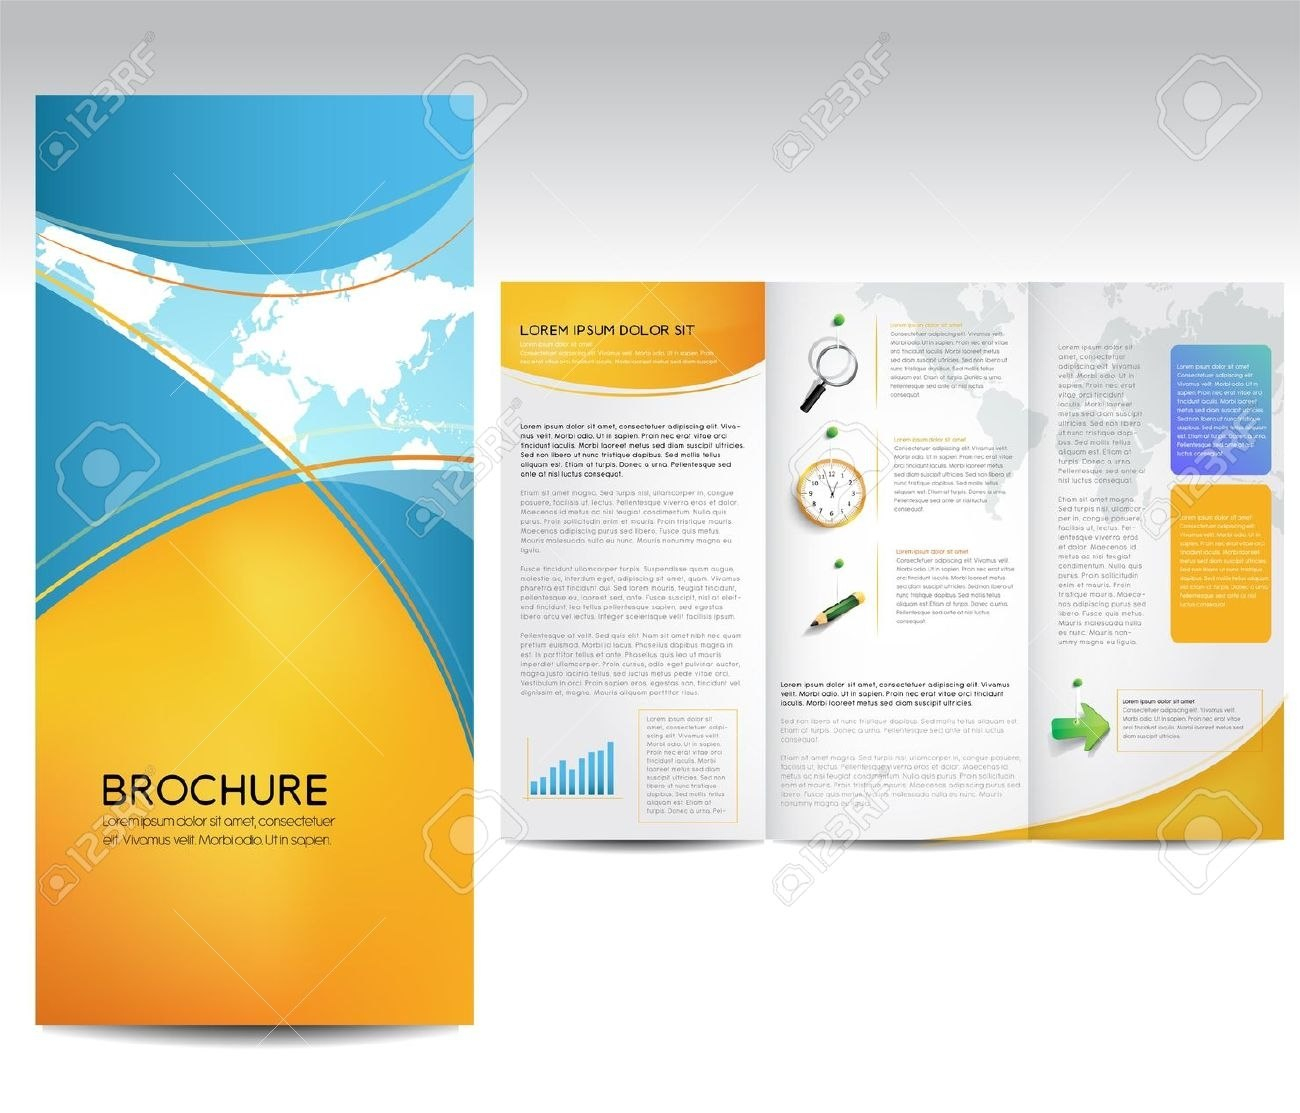 Template Ideas Free Brochure Templates For Word Awesome Tri Fold with Free Brochure Templates For Word 2010